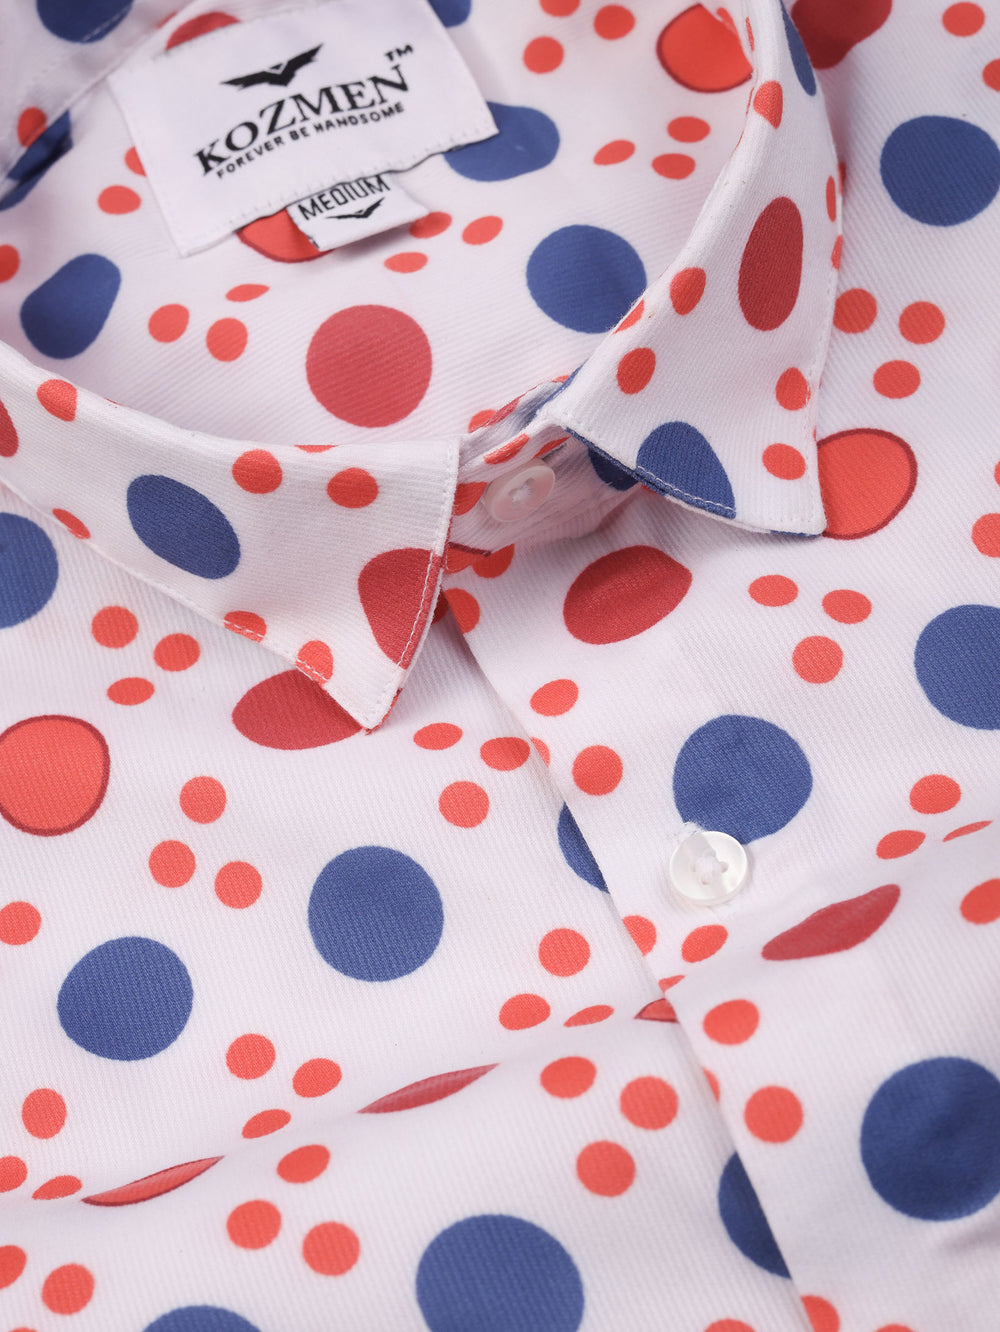 White Polka Dot Shirt with Red, Orange, and Blue Accents Regular Fit Shirt for men